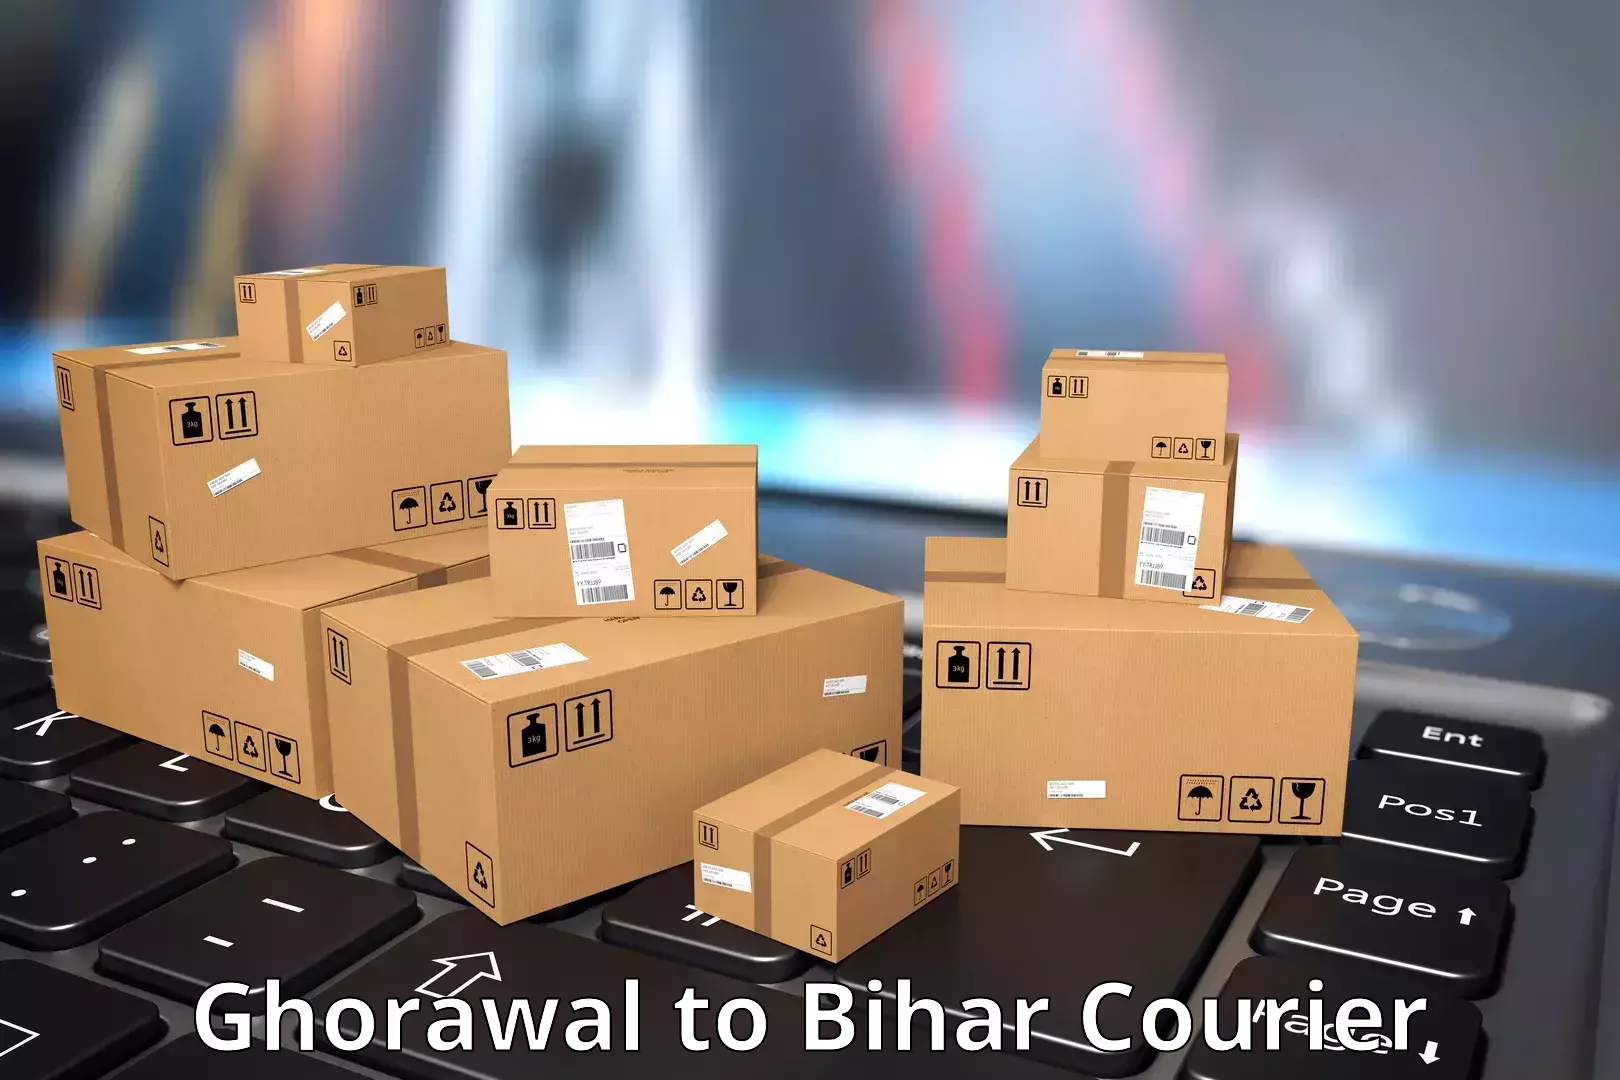 Reliable courier service Ghorawal to Aurangabad Bihar